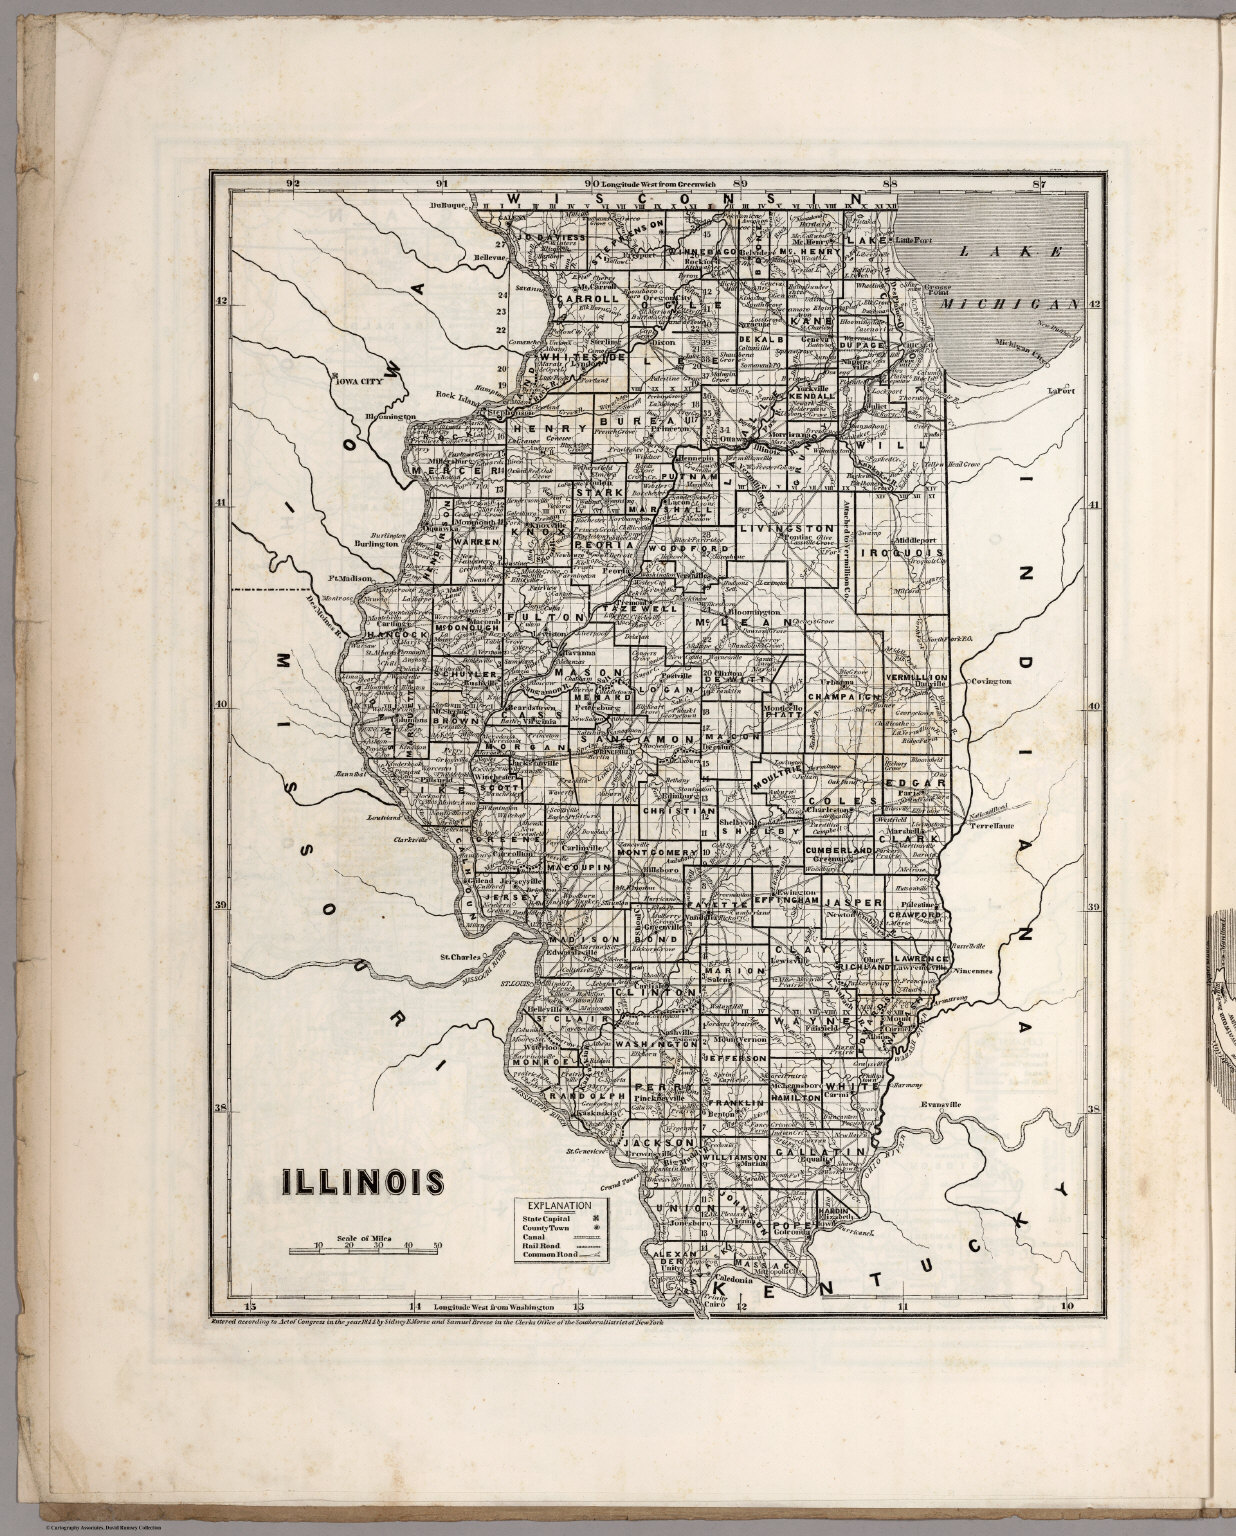 Illinois David Rumsey Historical Map Collection 4256